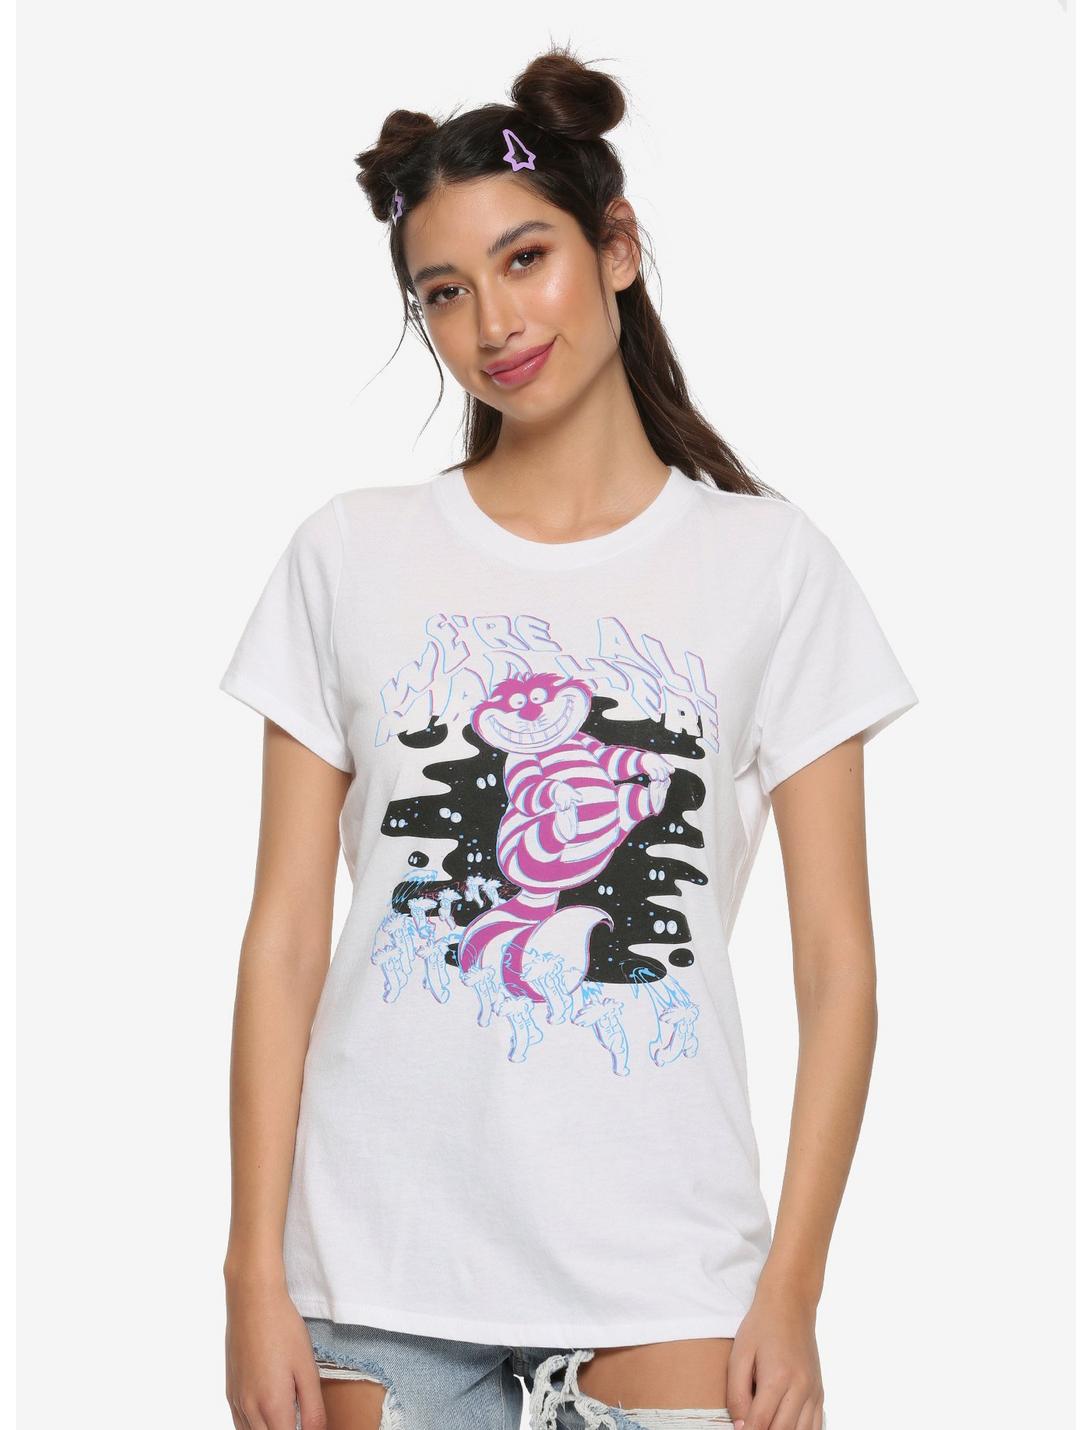 Disney Alice In Wonderland Cheshire Cat We're All Mad Here Trippy Girls T-Shirt, MULTI, hi-res